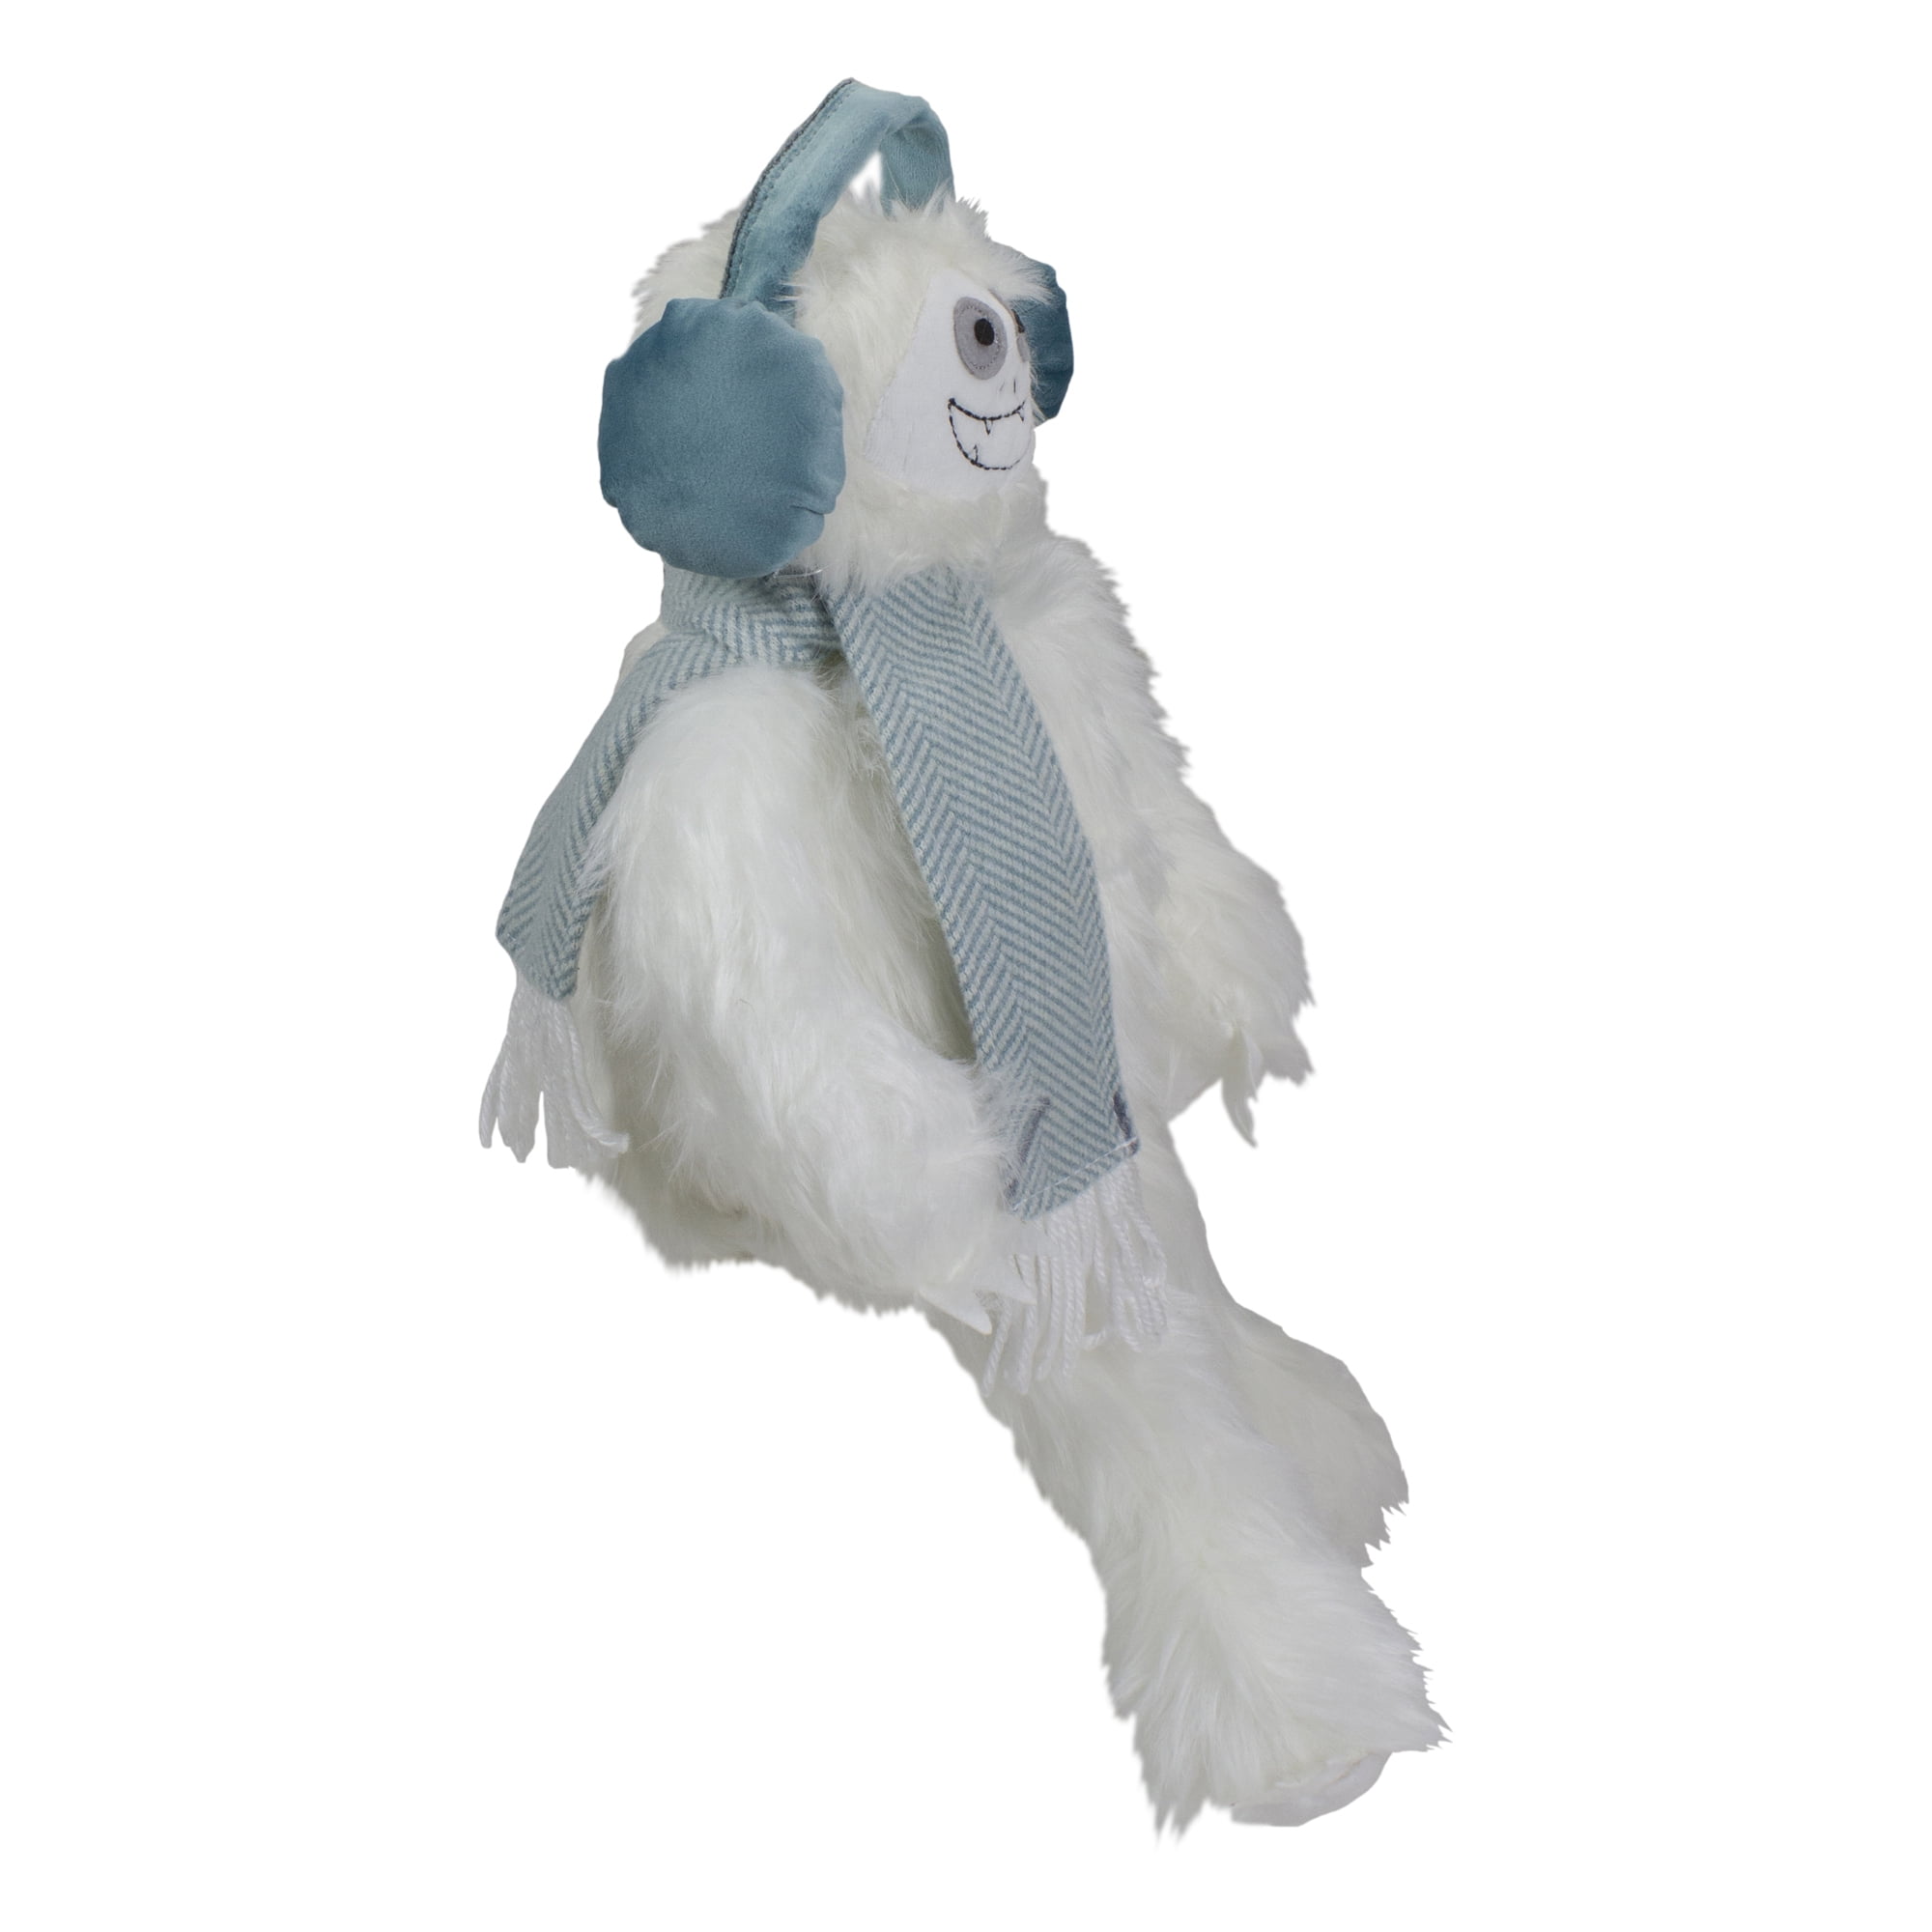 22-Inch Plush White and Blue Sitting Tabletop Yeti Christmas Figure